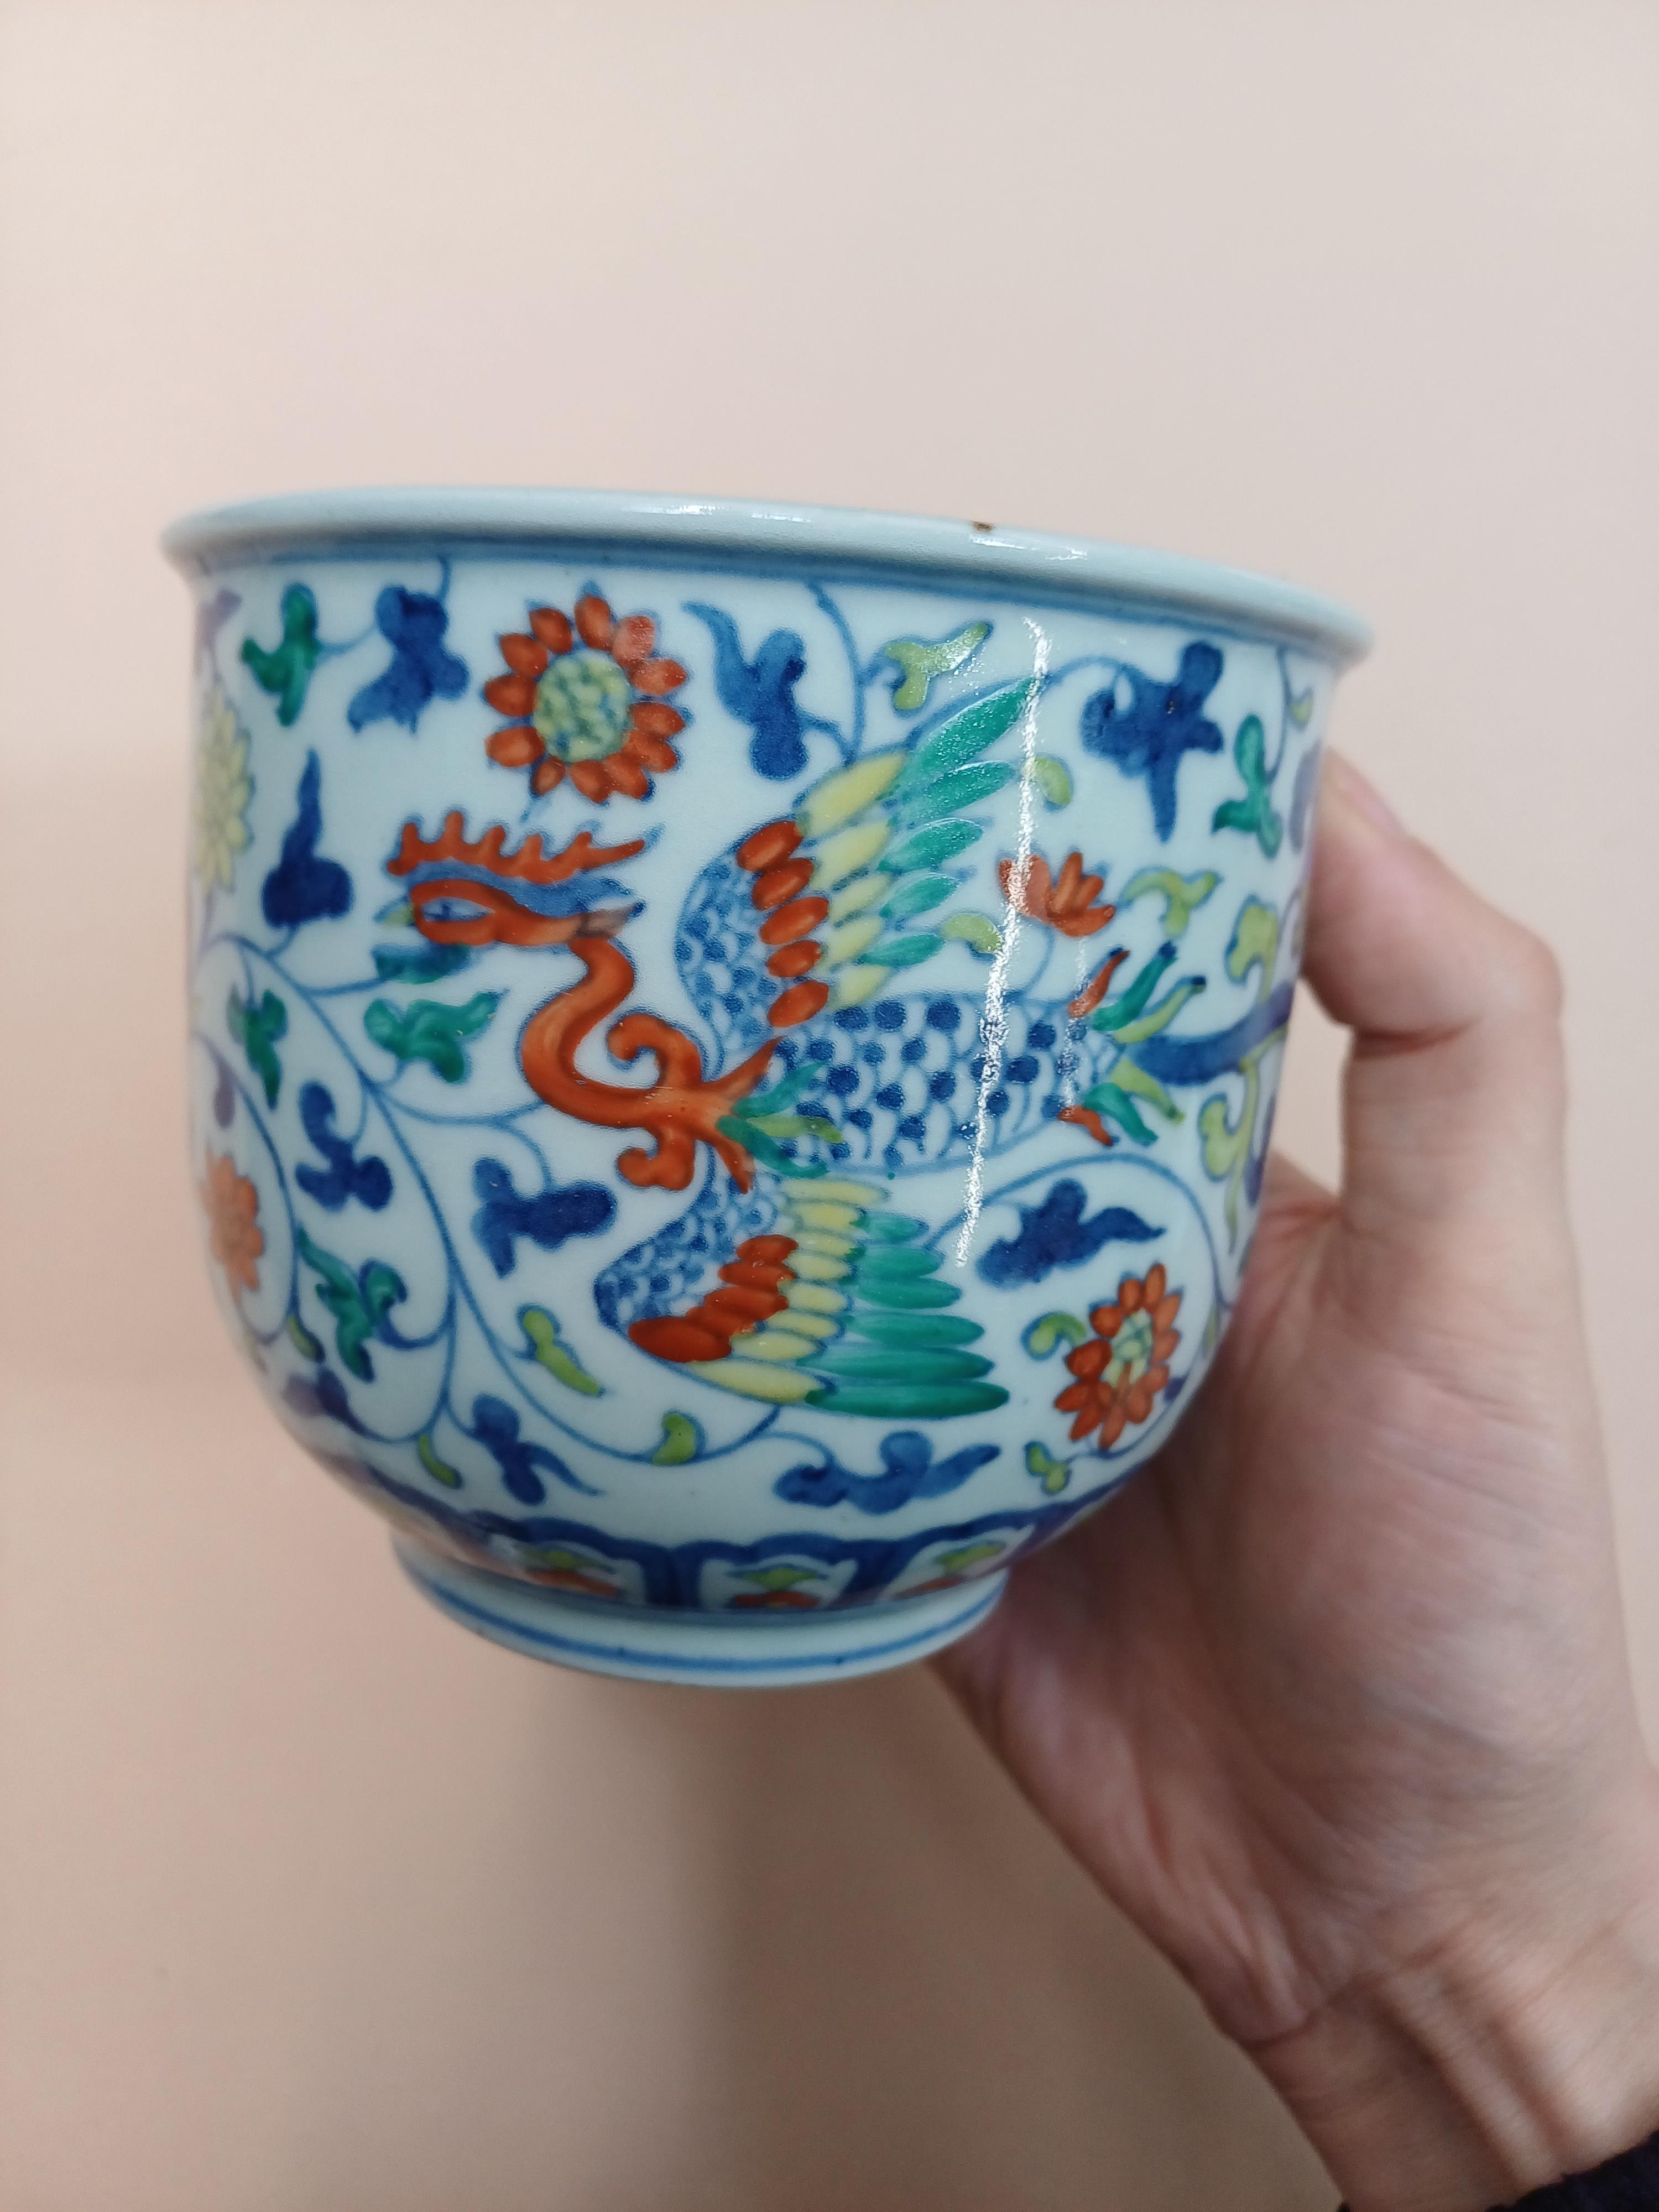 A JAPANESE IMARI POT, A FAMILLE-ROSE DISH, AND TWO JARDINIERES 十九至二十世紀 伊萬里罐，粉彩盤盆一對 - Image 11 of 17